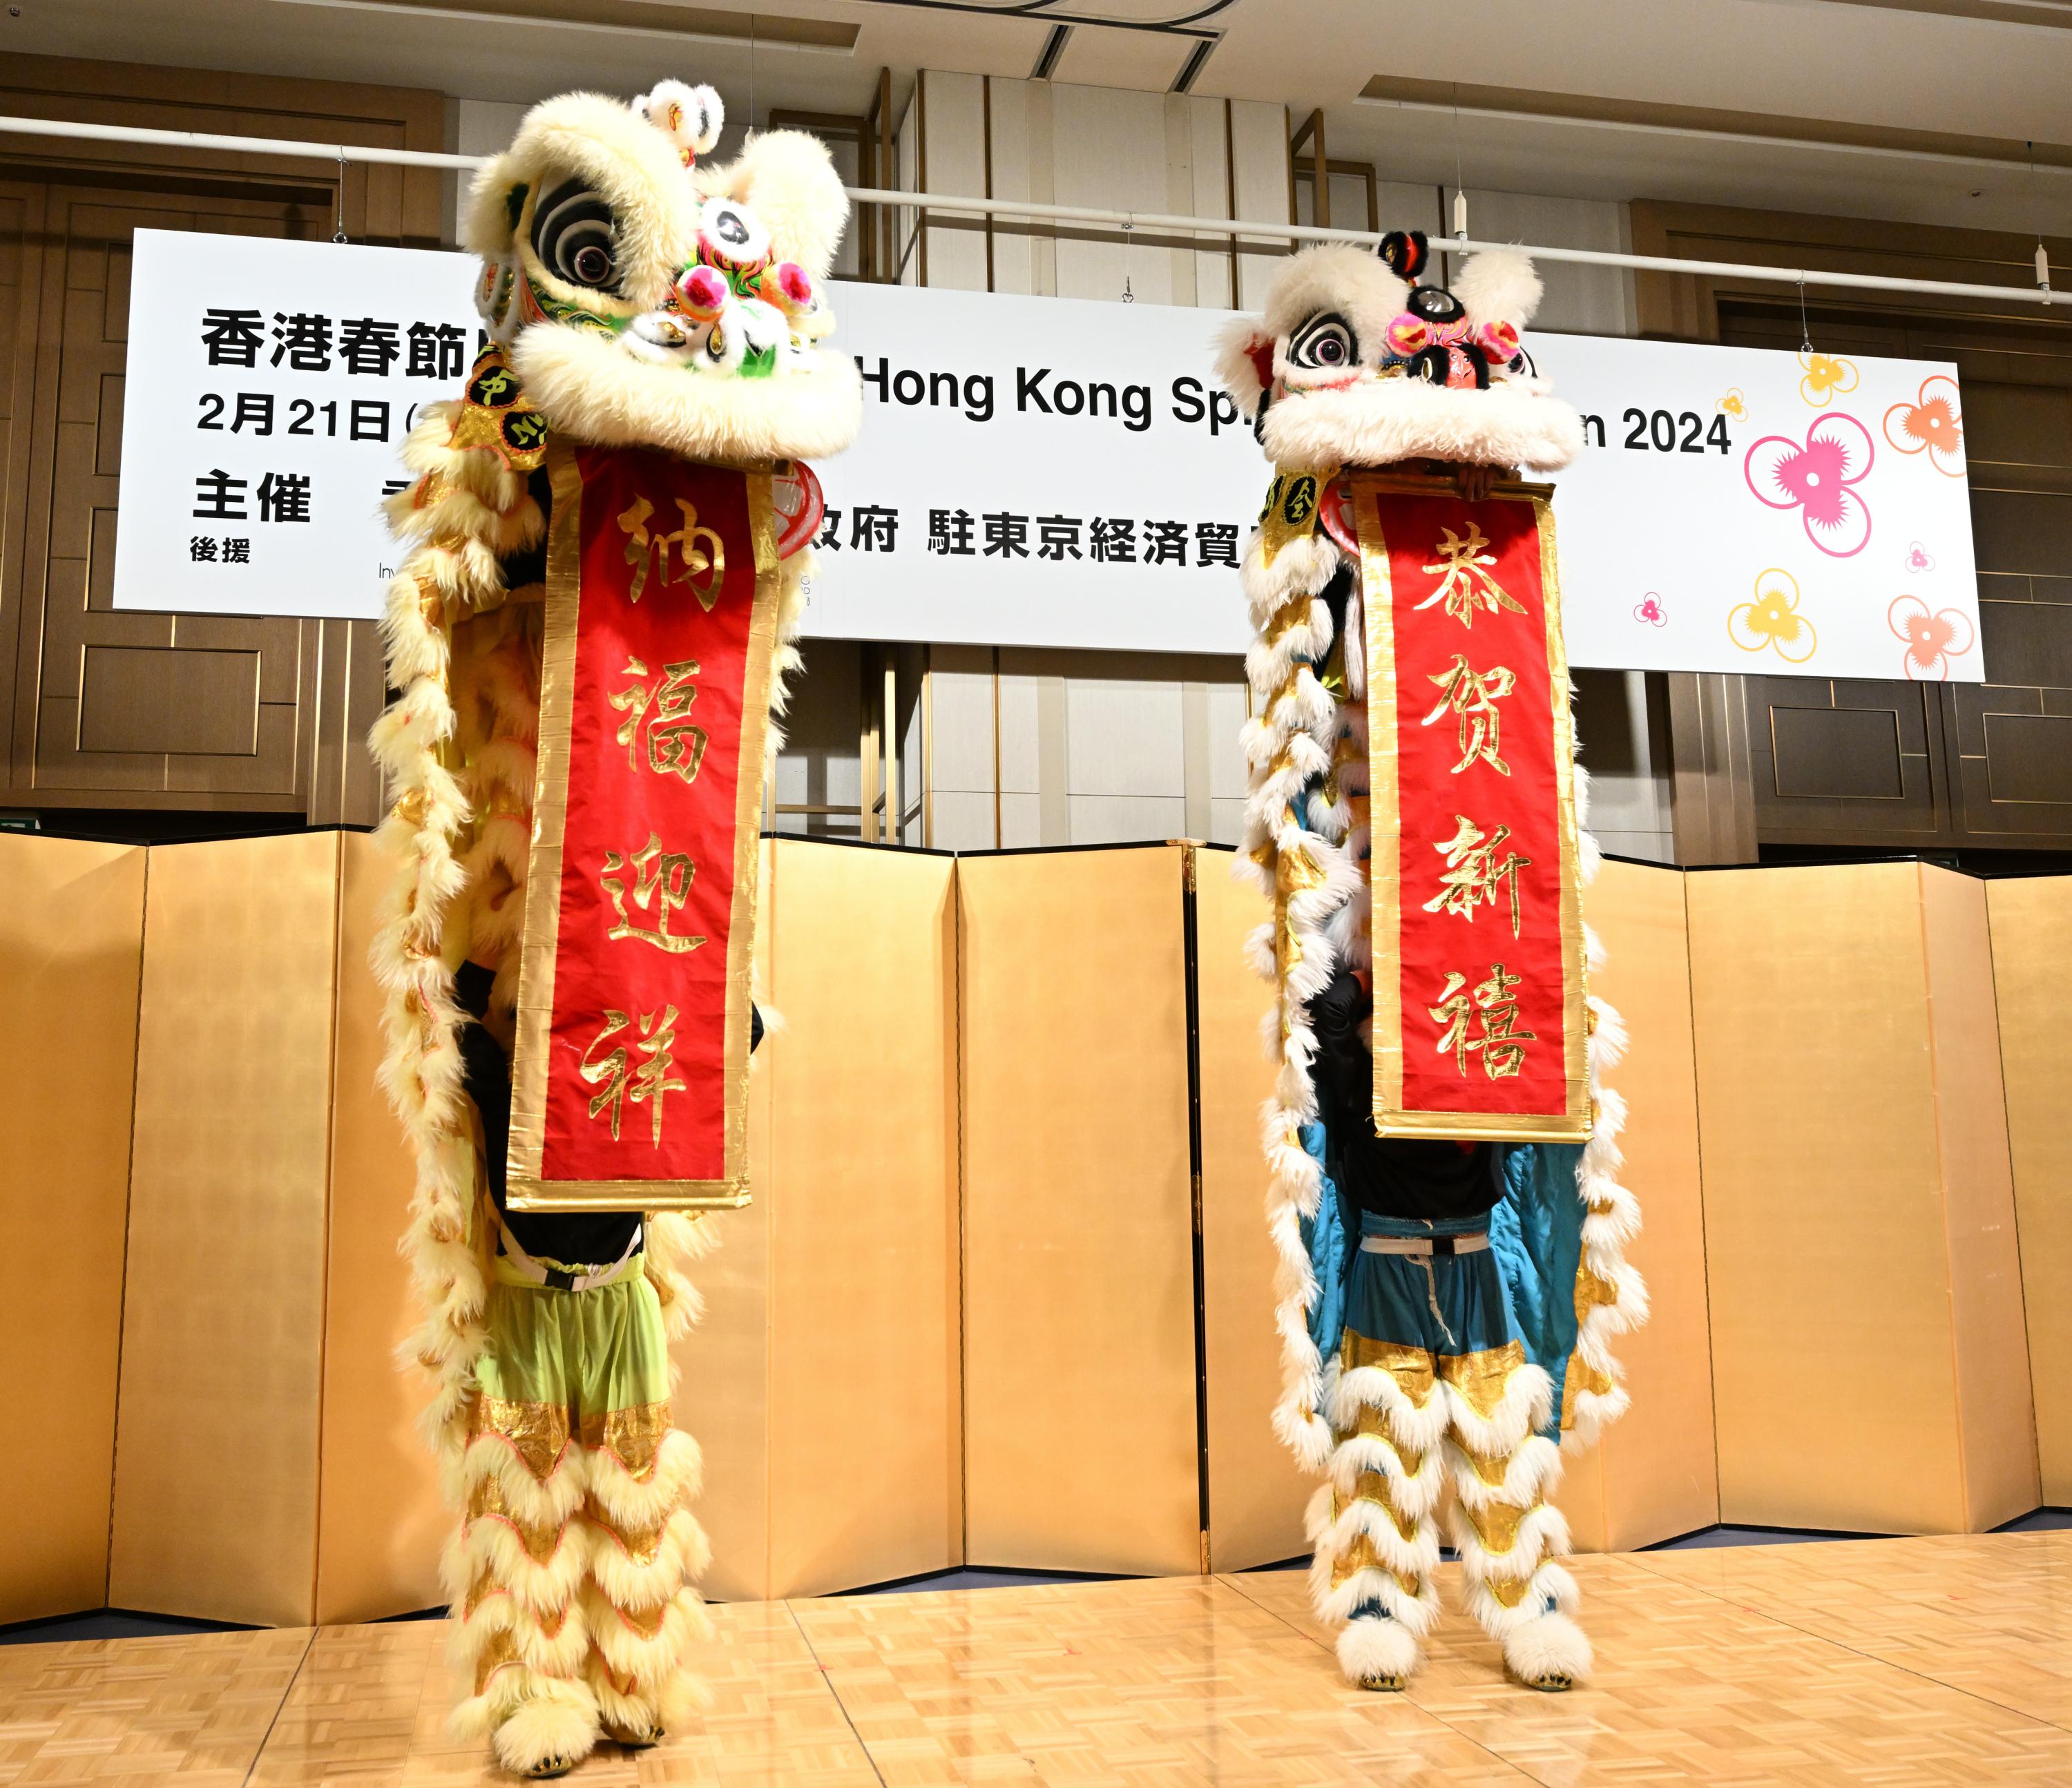 A lion dance is performed at the spring reception held by the Hong Kong Economic and Trade Office (Tokyo) in Tokyo today (February 21) to celebrate the Chinese New Year.